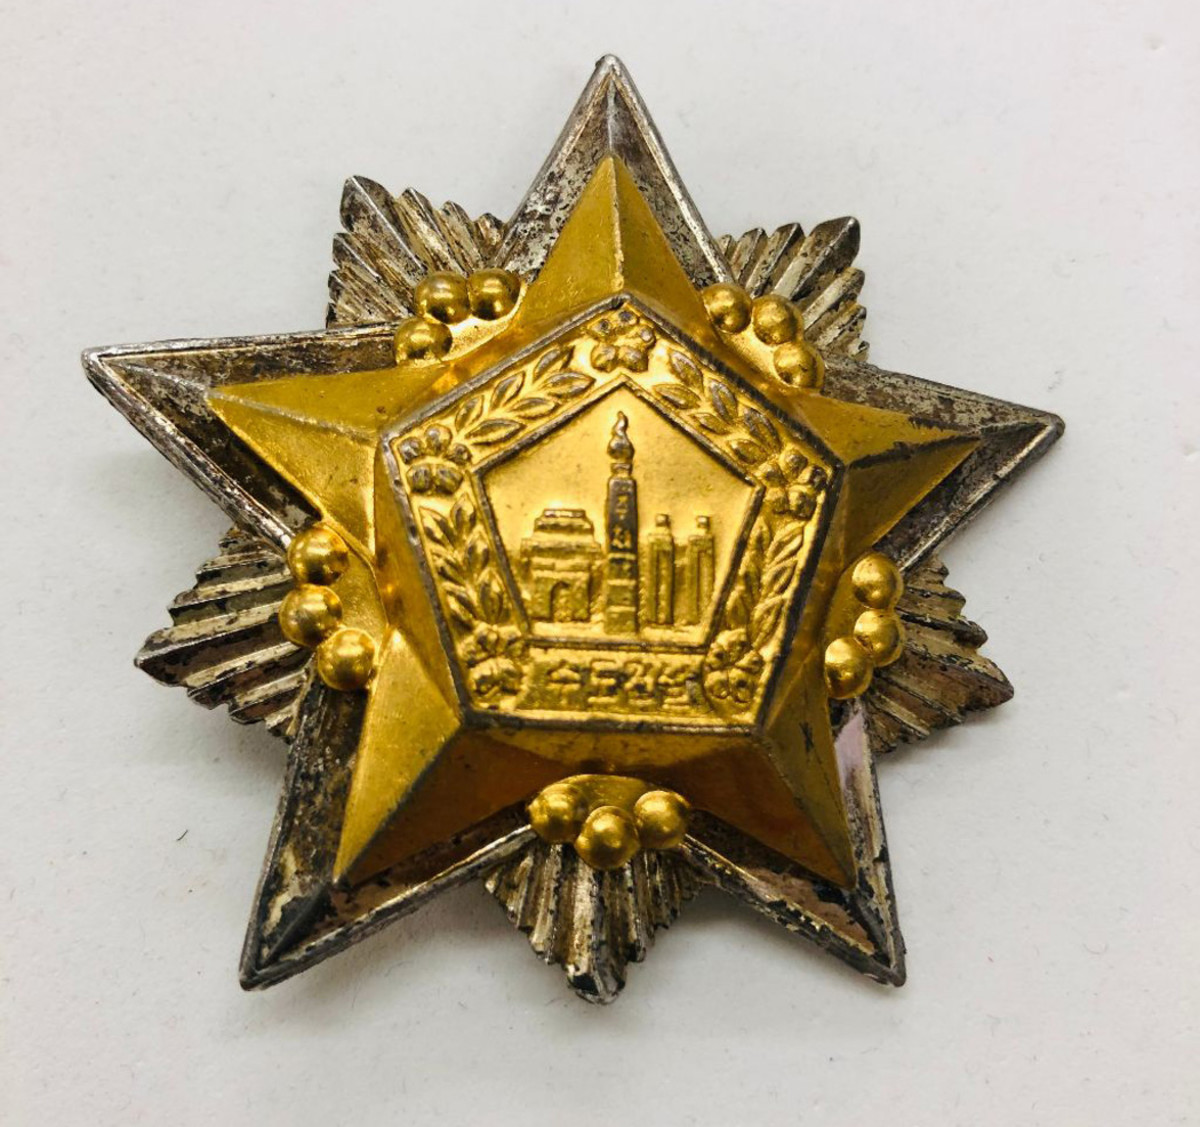 The Order of the Capital City Construction Commemoration is a 60mm wide badge with a gilt star superimposed over a large silver star with rays.